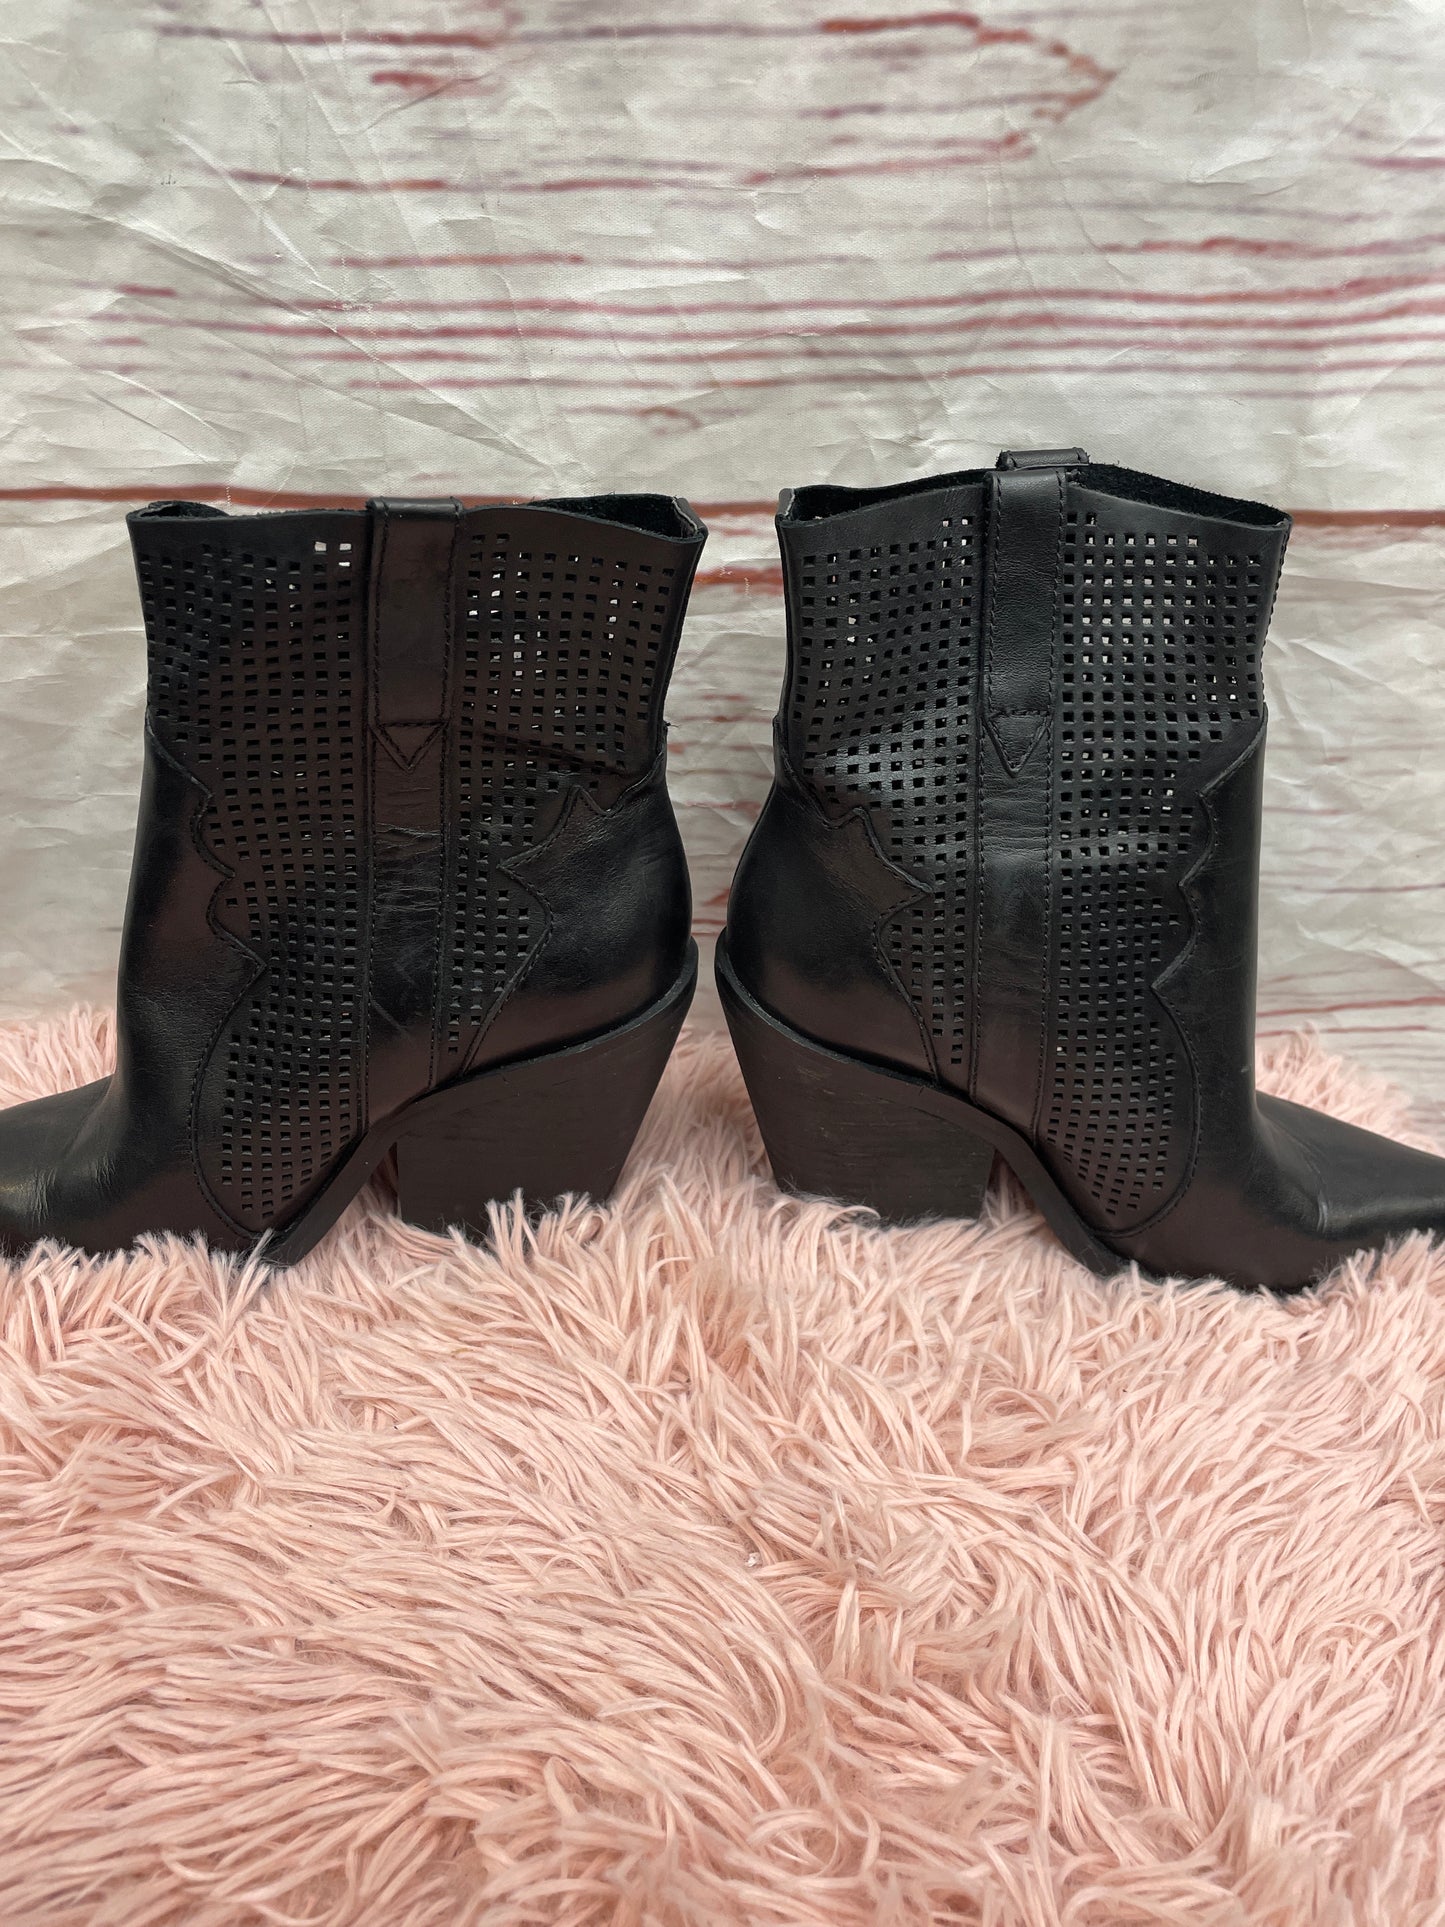 Boots Ankle Heels By Steve Madden  Size: 7.5